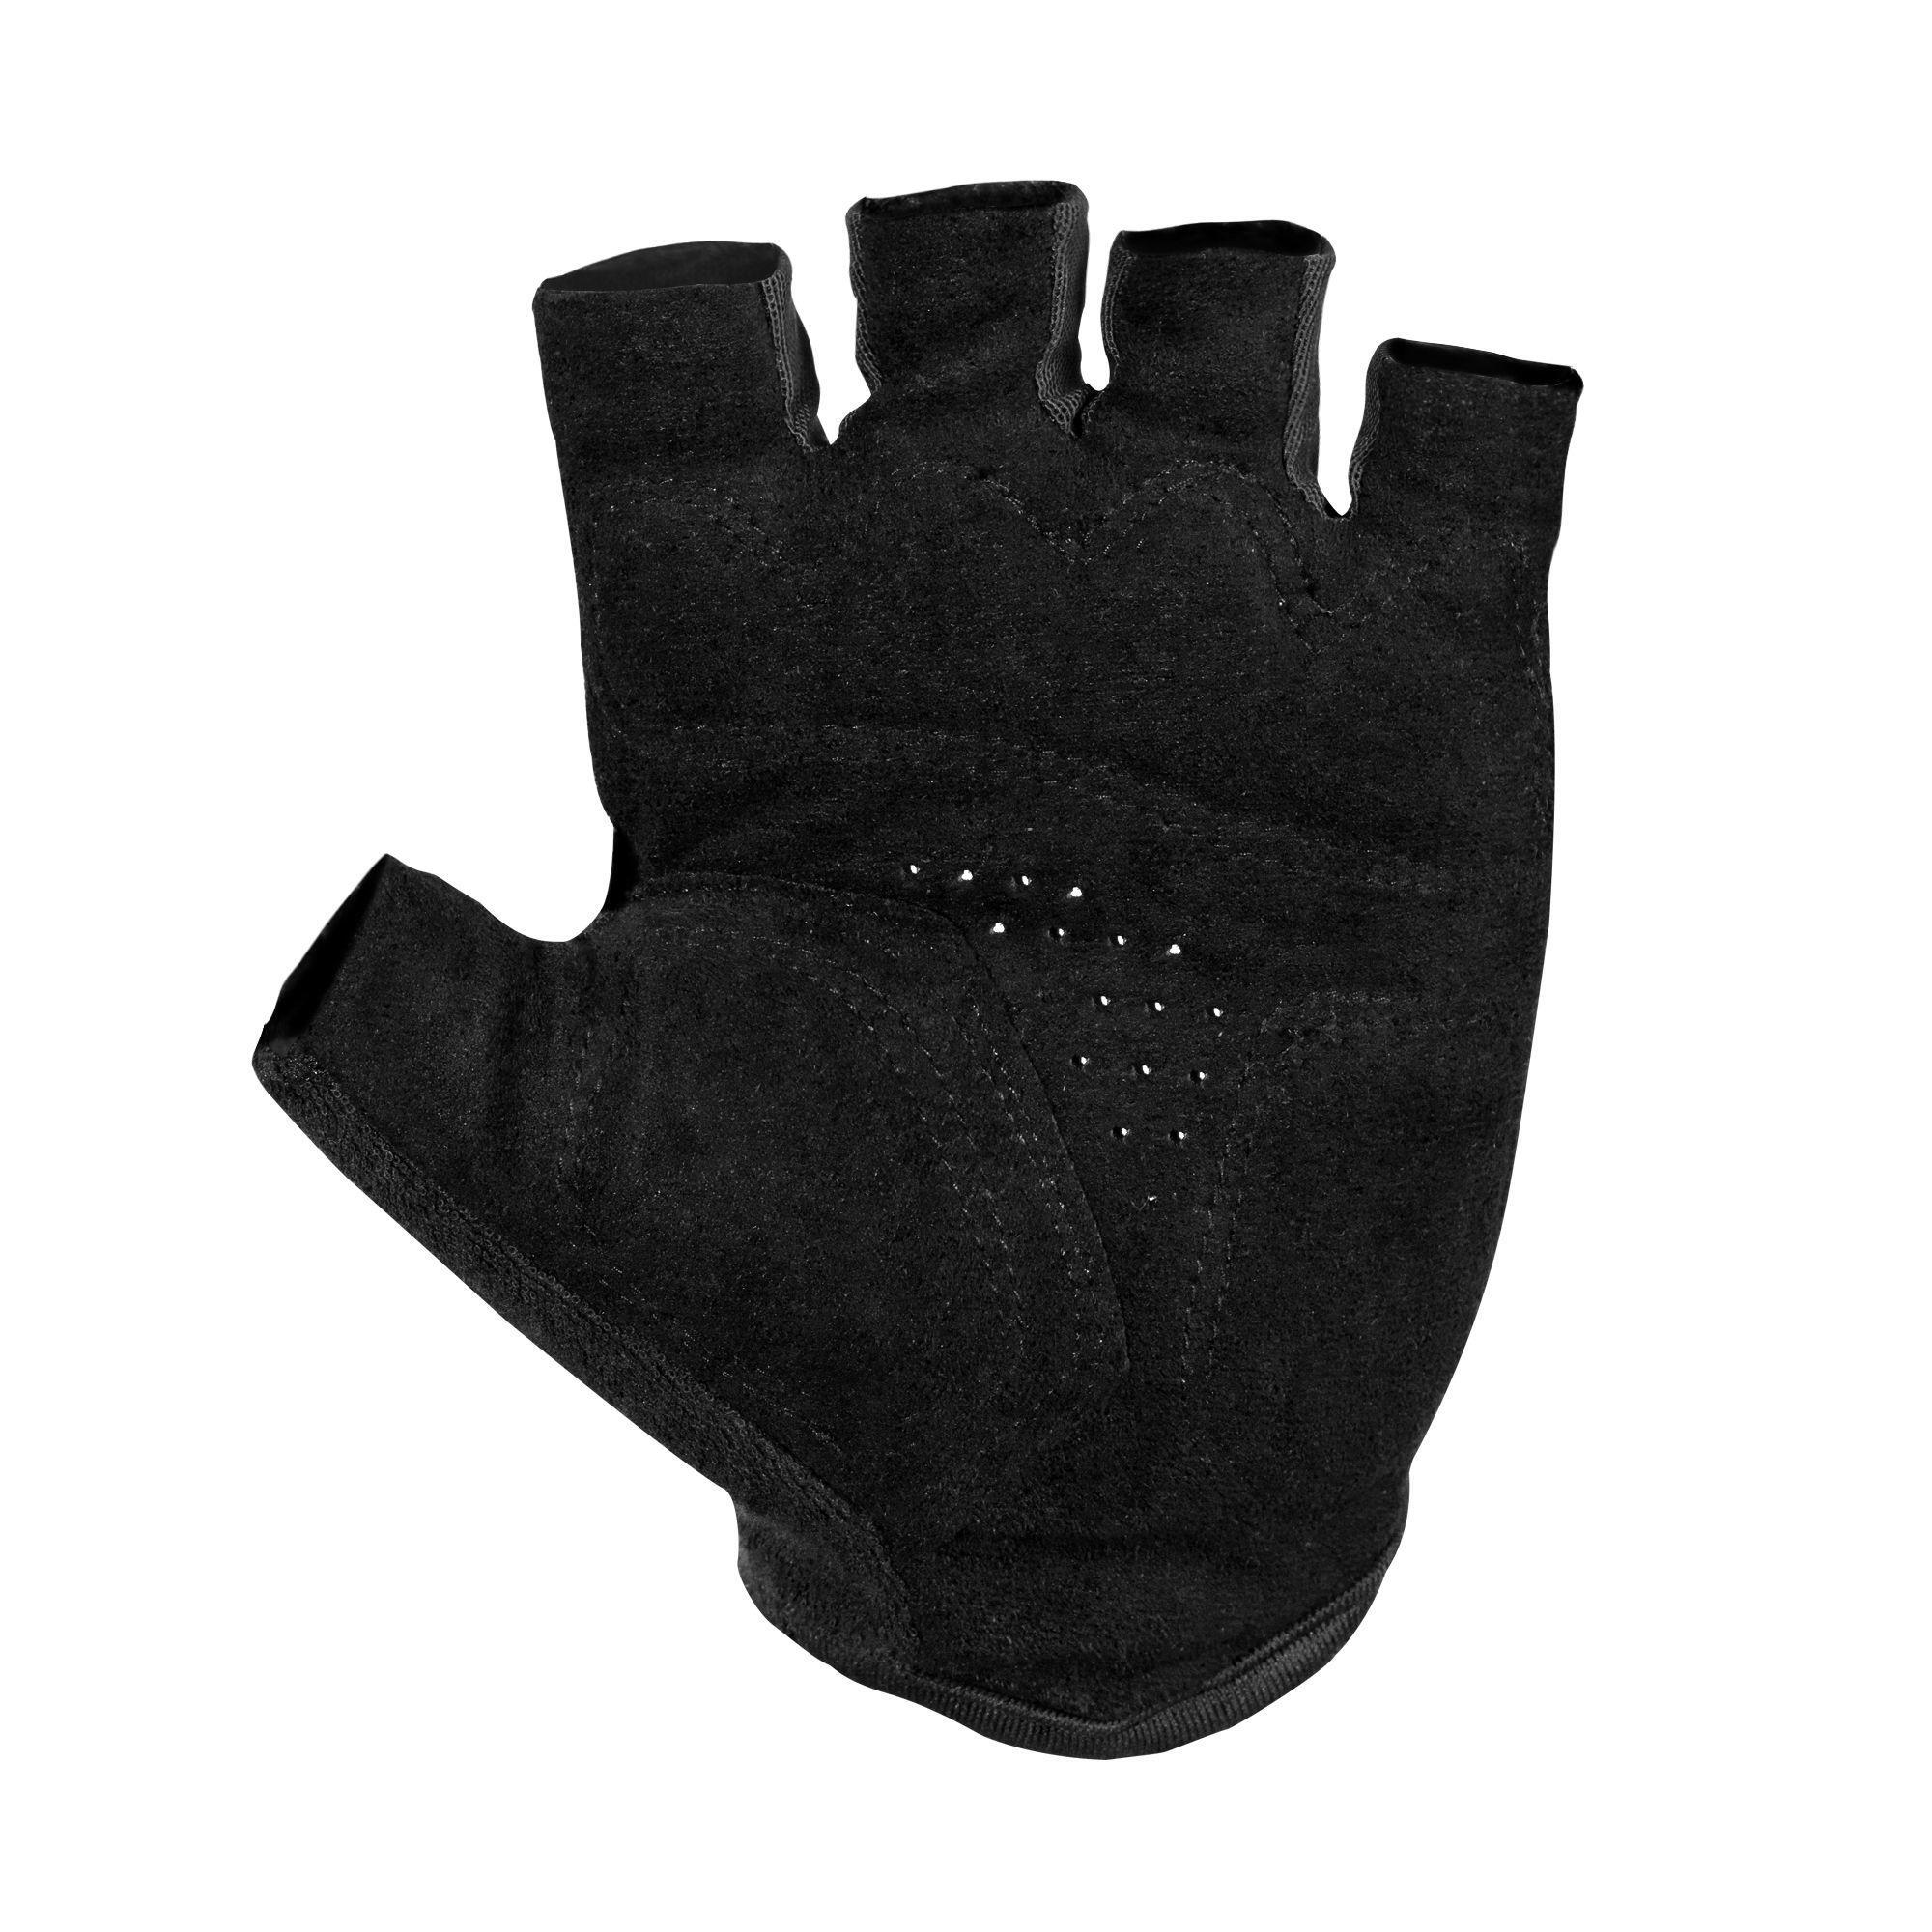 Road Cycling Gloves 500 - Black 2/6